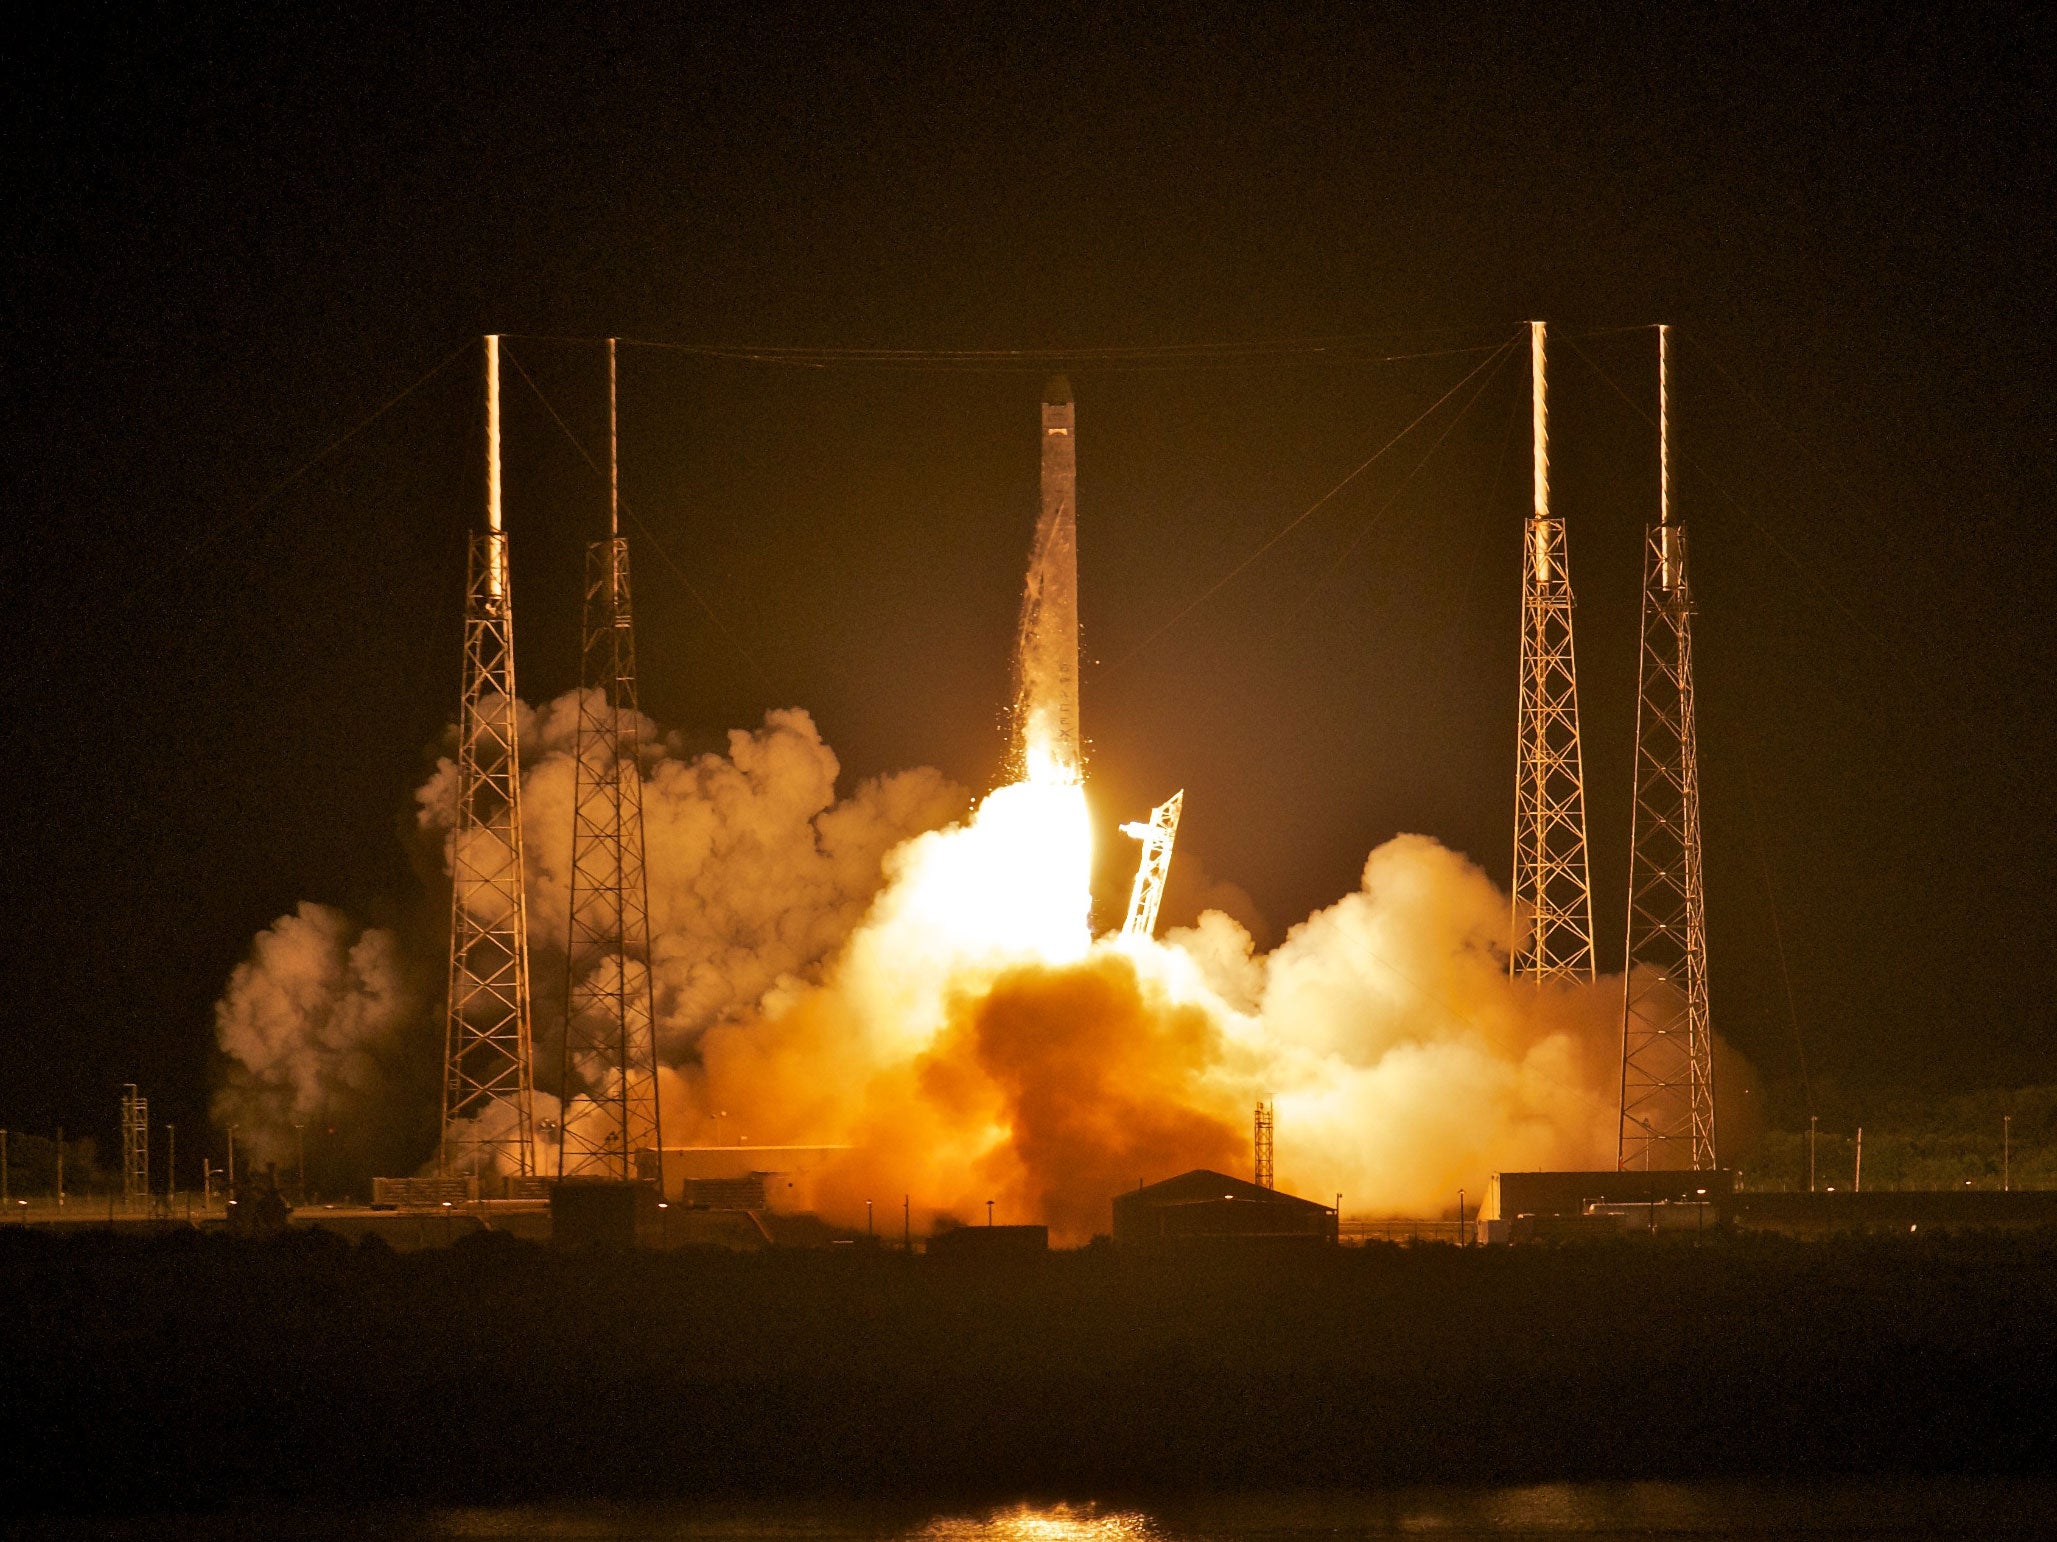 A Falcon 9 rocket lifts off from Cape Canaveral in May 2012